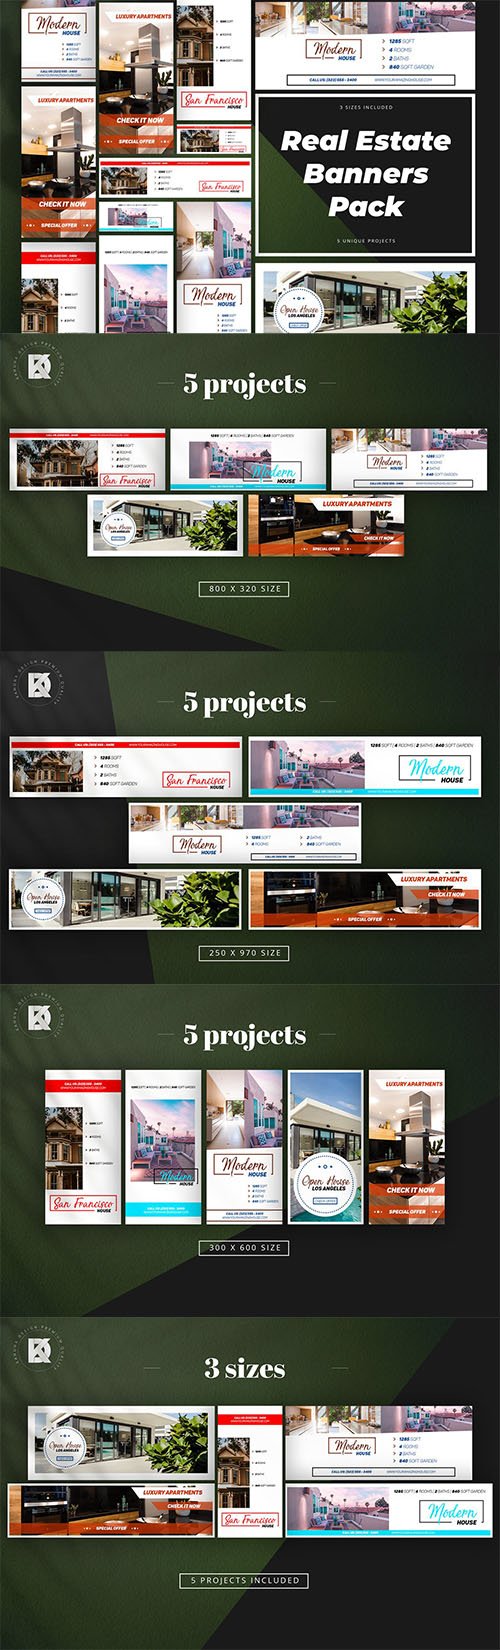 Real Estate Banner Pack PSD Templates